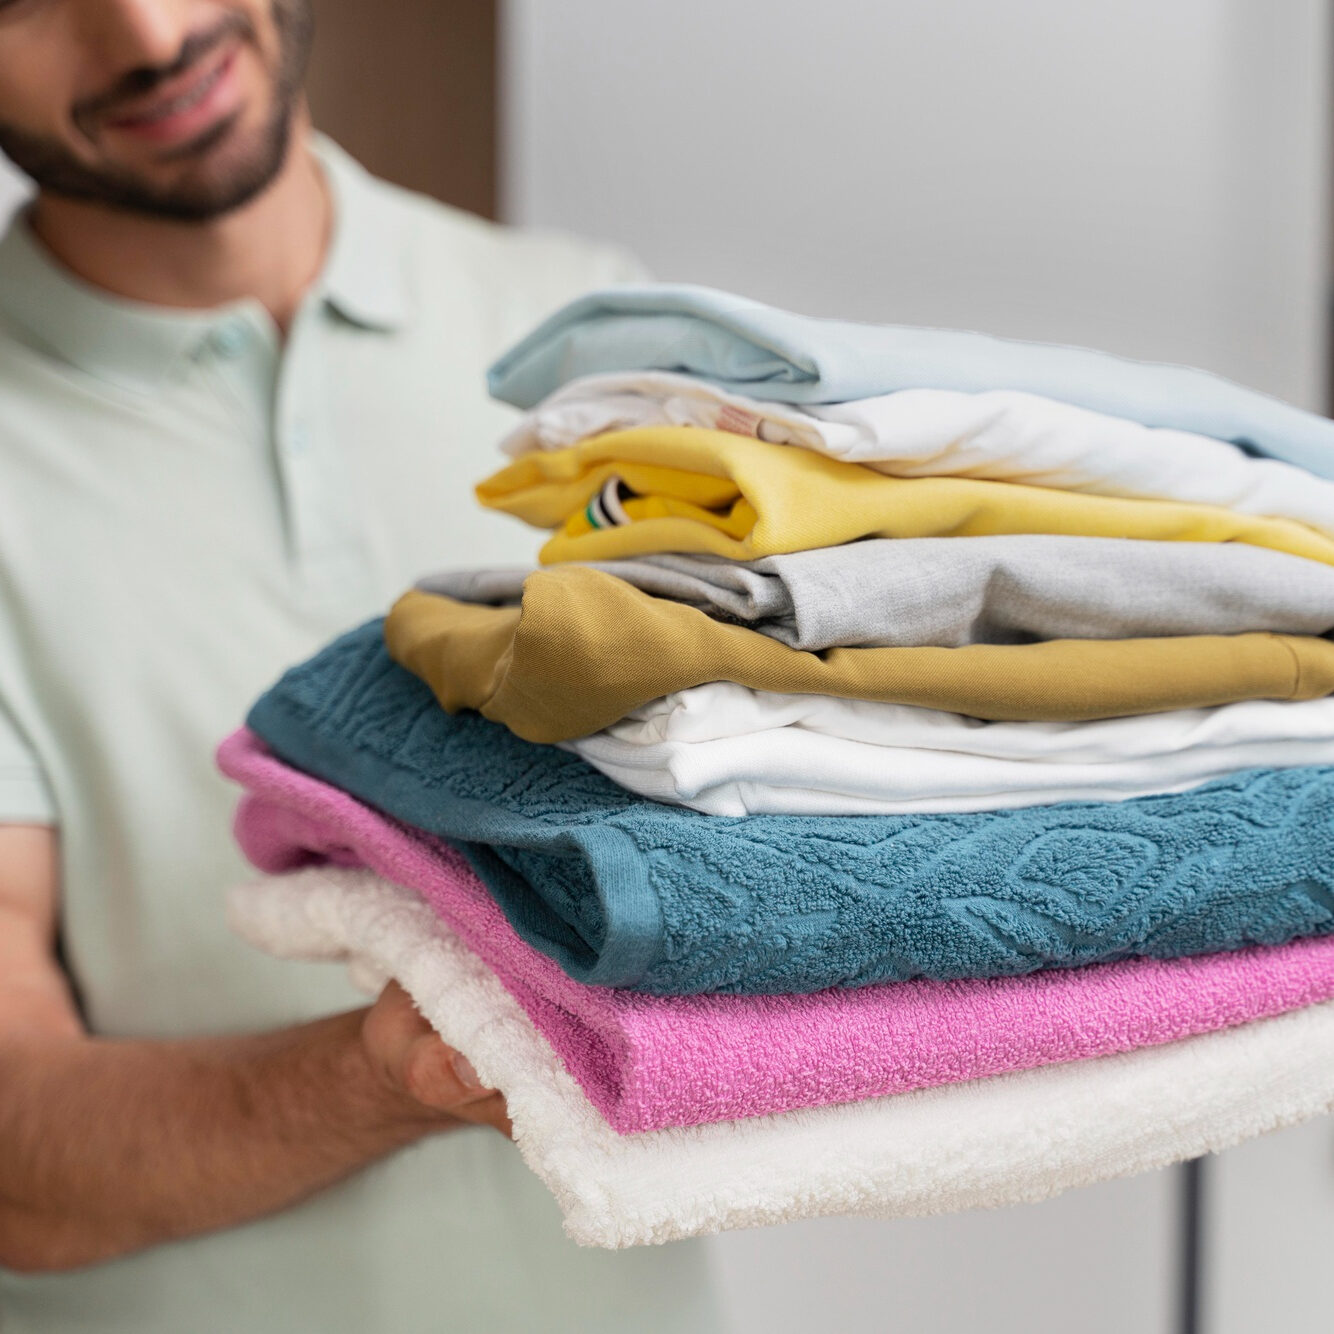 man-holding-pile-clean-clothes